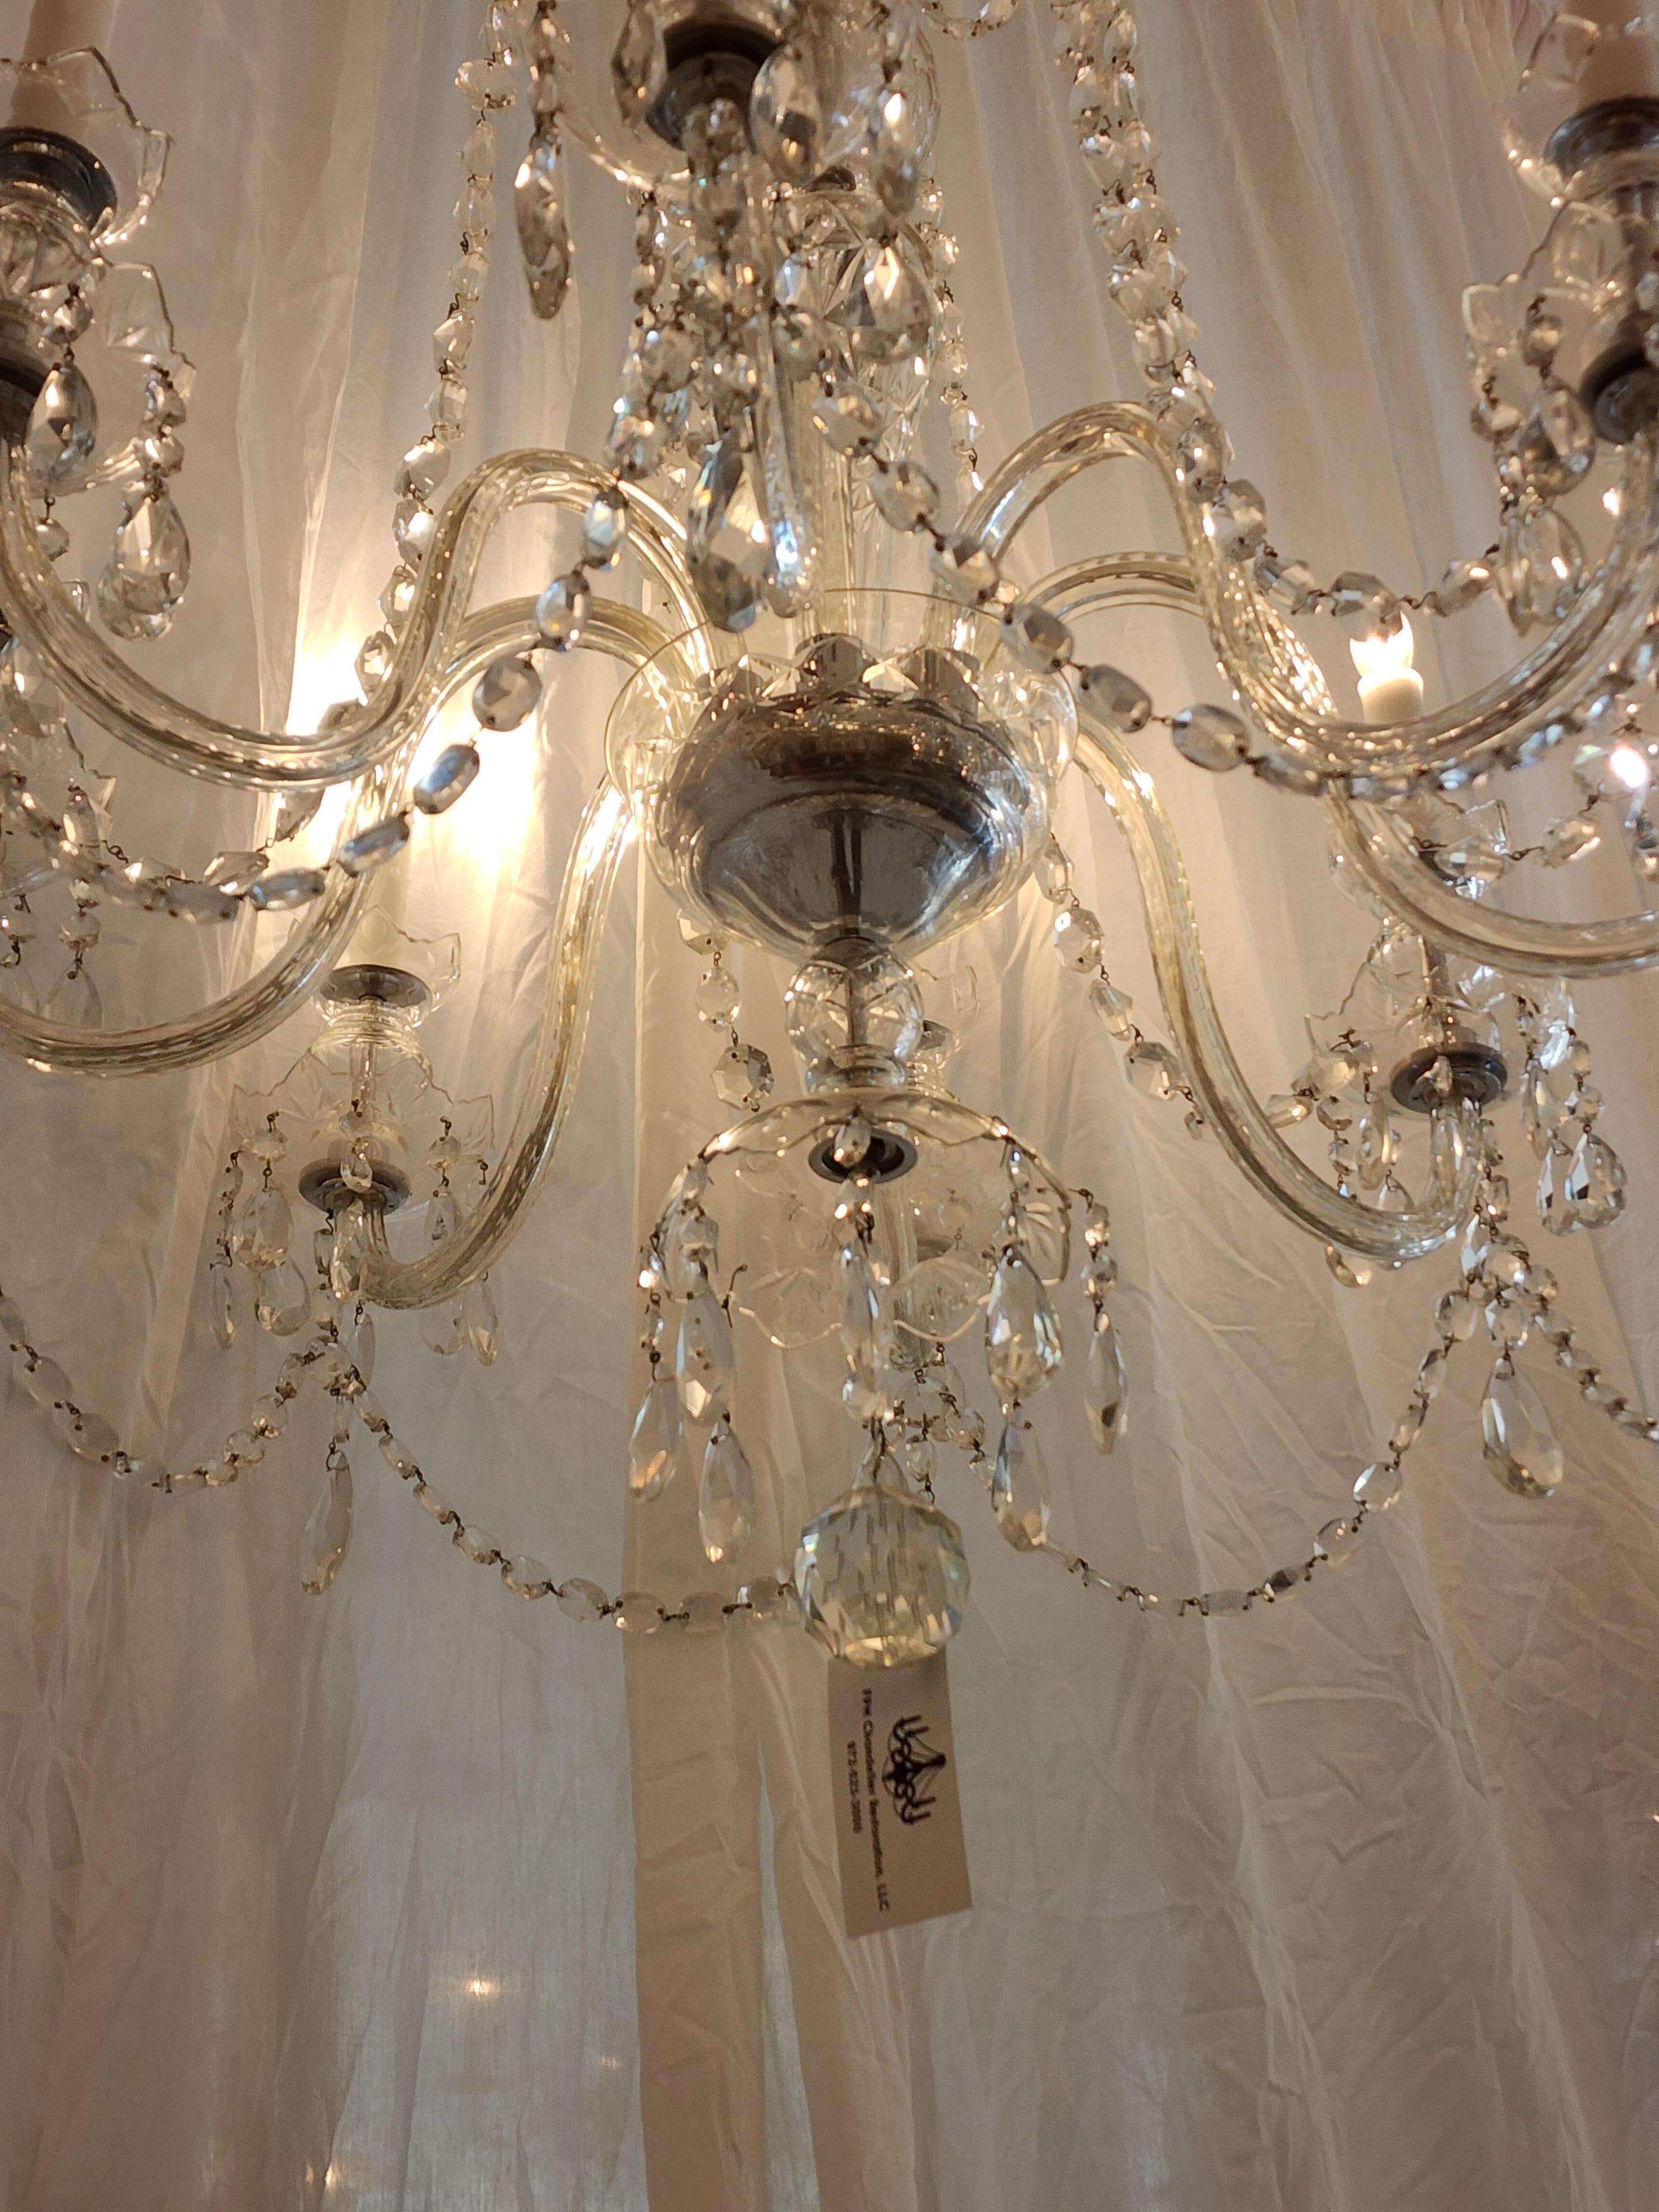 Antique Waterford crystal chandelier with Wax candle covers.